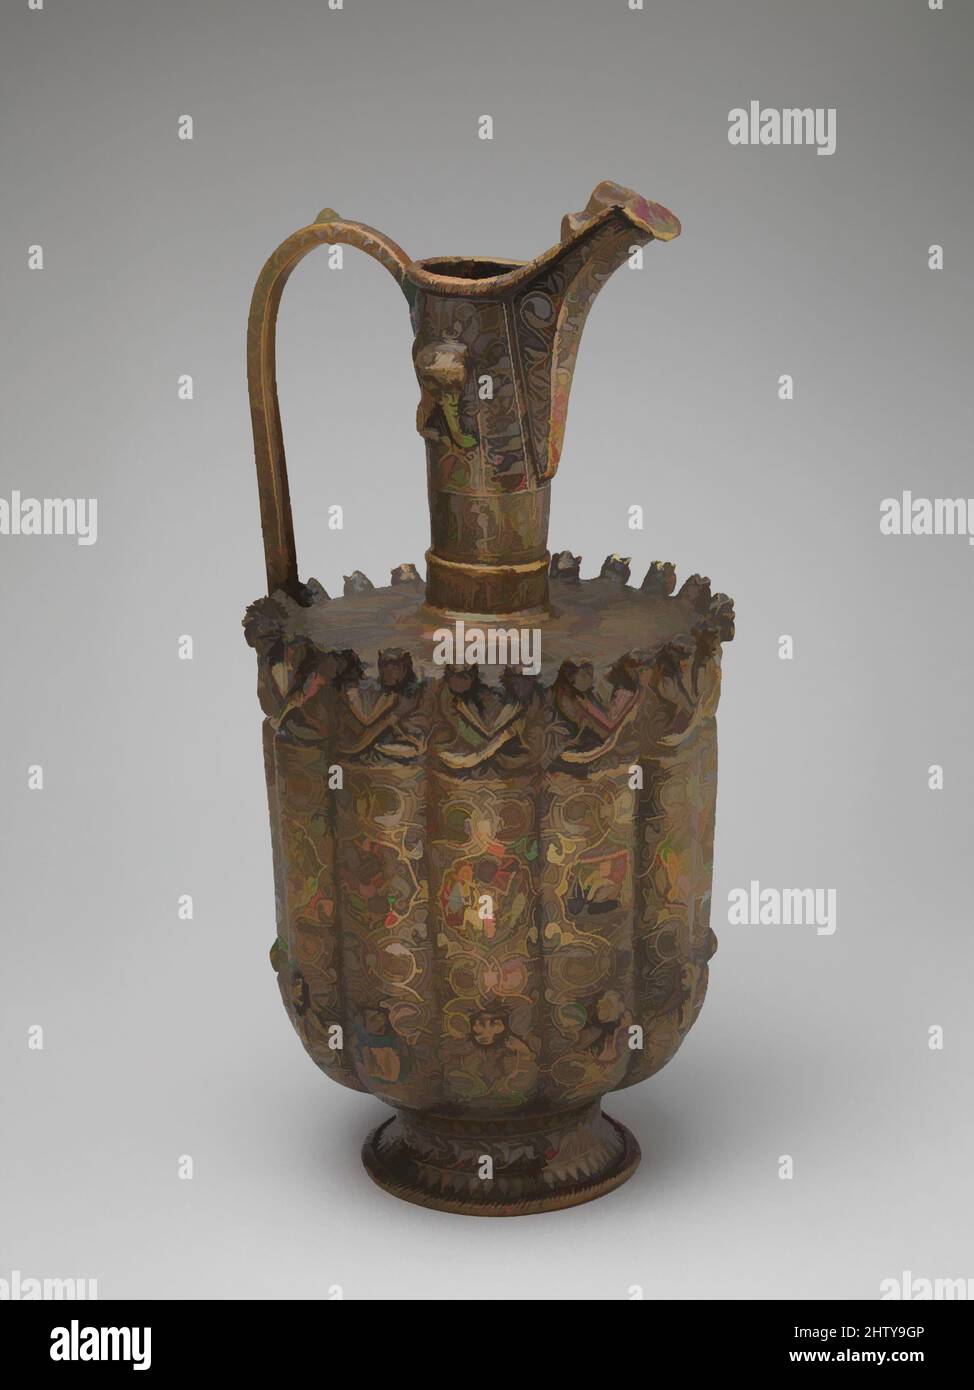 Art inspired by Ewer, ca. 1180–1210, Attributed to Iran or Afghanistan, Khurasan or Herat, Brass; raised, repoussé, inlaid with silver and a black compound, H. 15 3/4 in. (40 cm), Metal, This ewer comes from a group of silver-inlaid brass vessels of similar shape and size decorated, Classic works modernized by Artotop with a splash of modernity. Shapes, color and value, eye-catching visual impact on art. Emotions through freedom of artworks in a contemporary way. A timeless message pursuing a wildly creative new direction. Artists turning to the digital medium and creating the Artotop NFT Stock Photo